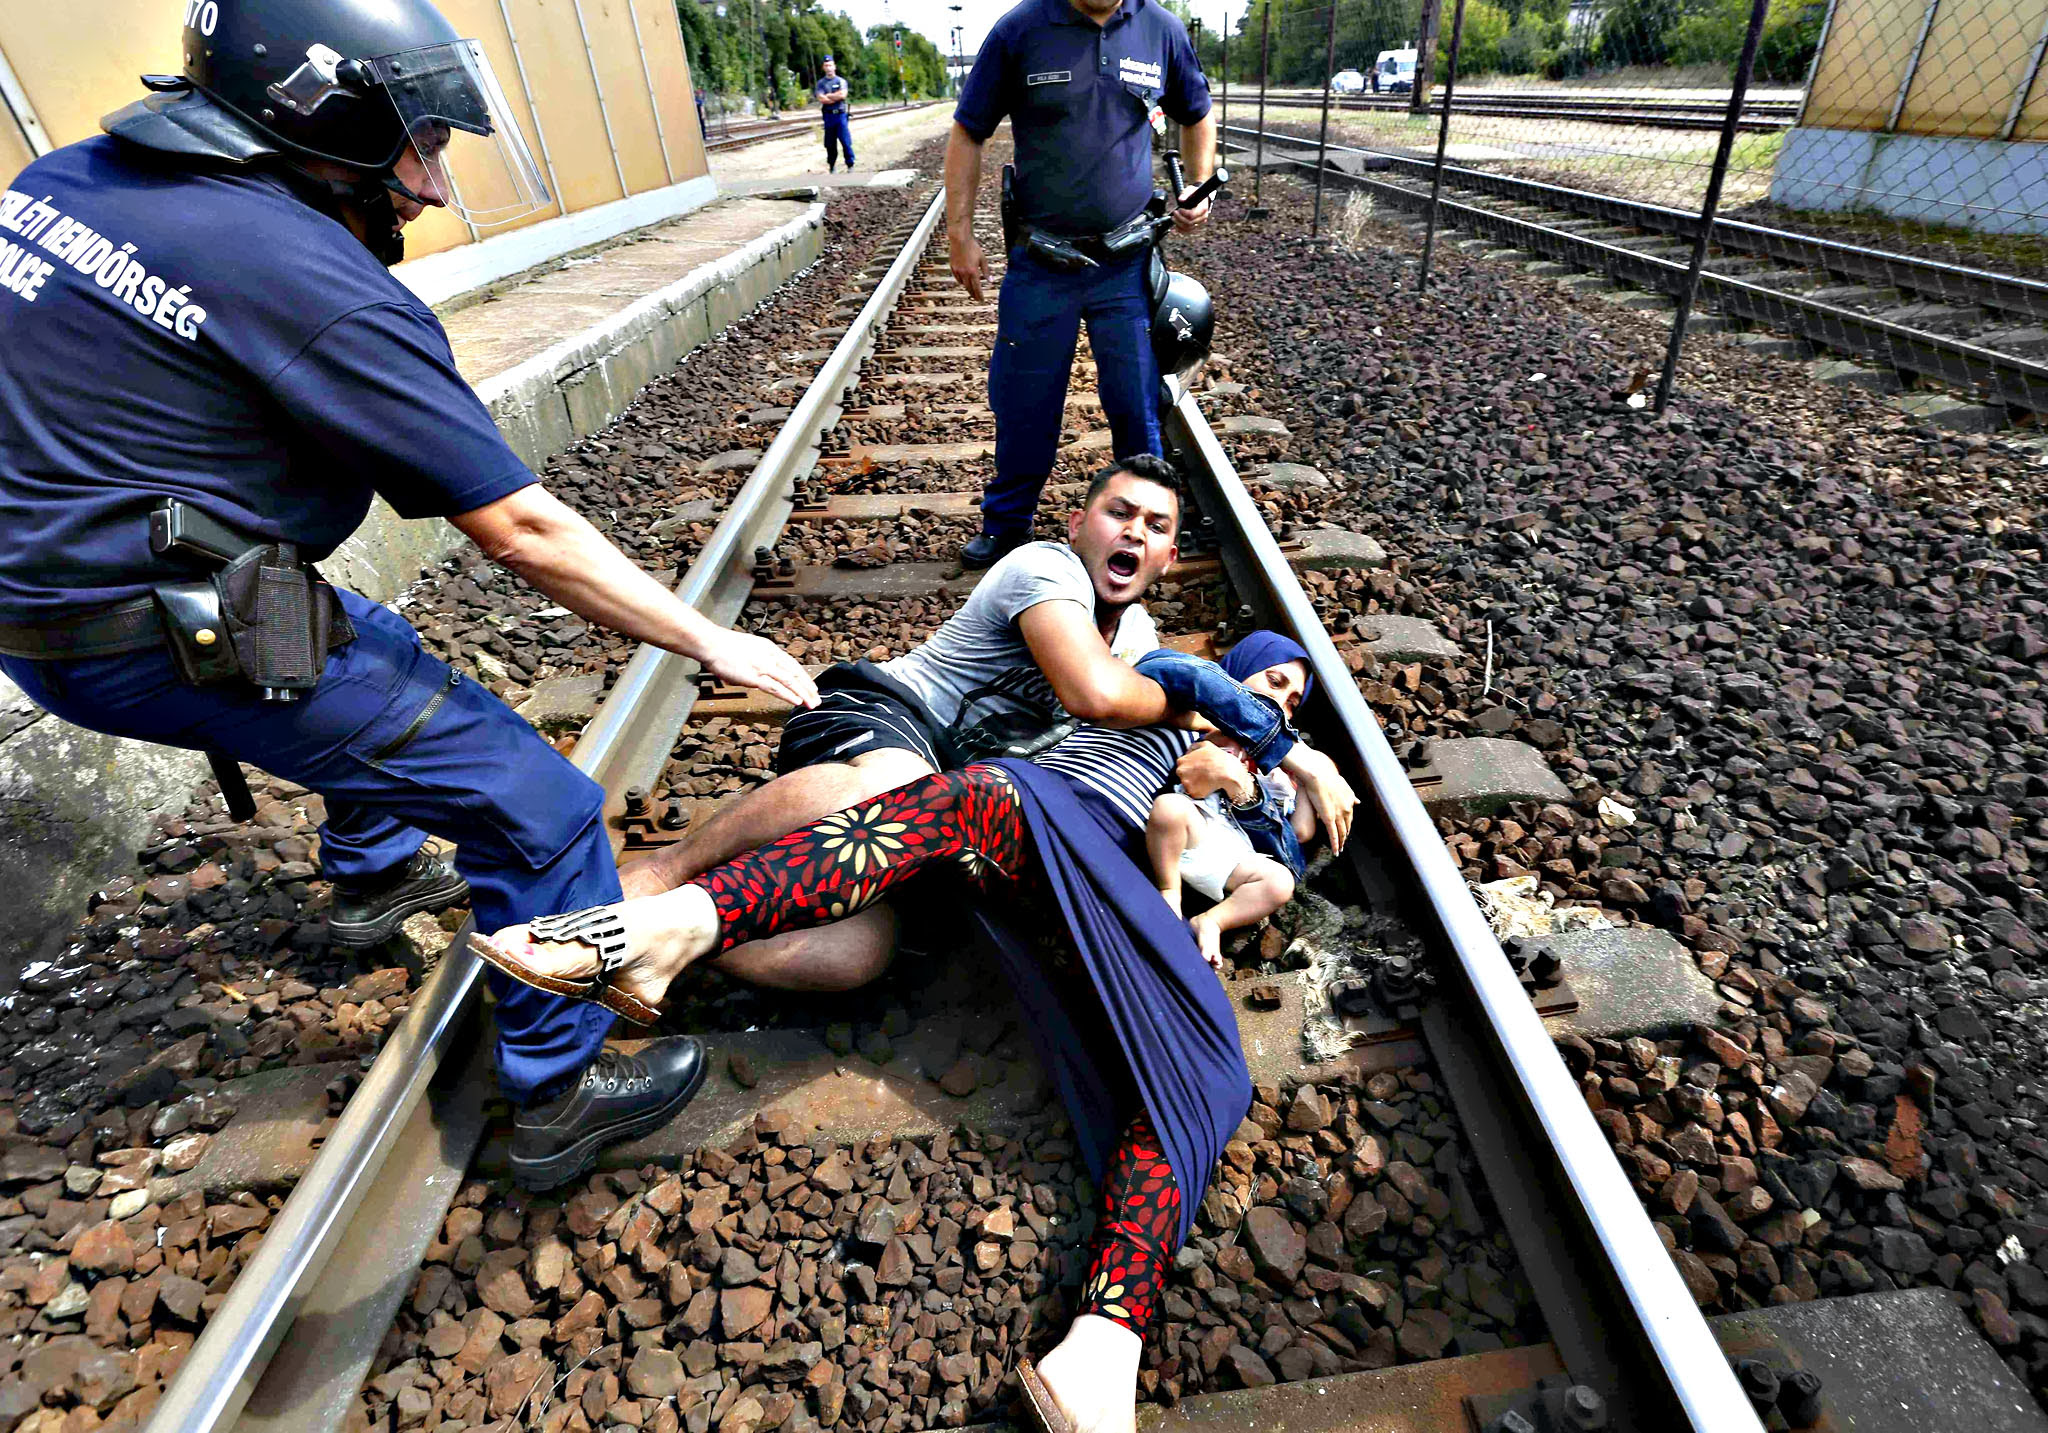 Hungarian policemen stand by the family of migrants protesting on the tracks at the railway station in the town of Bicske, Hungary on Thursday